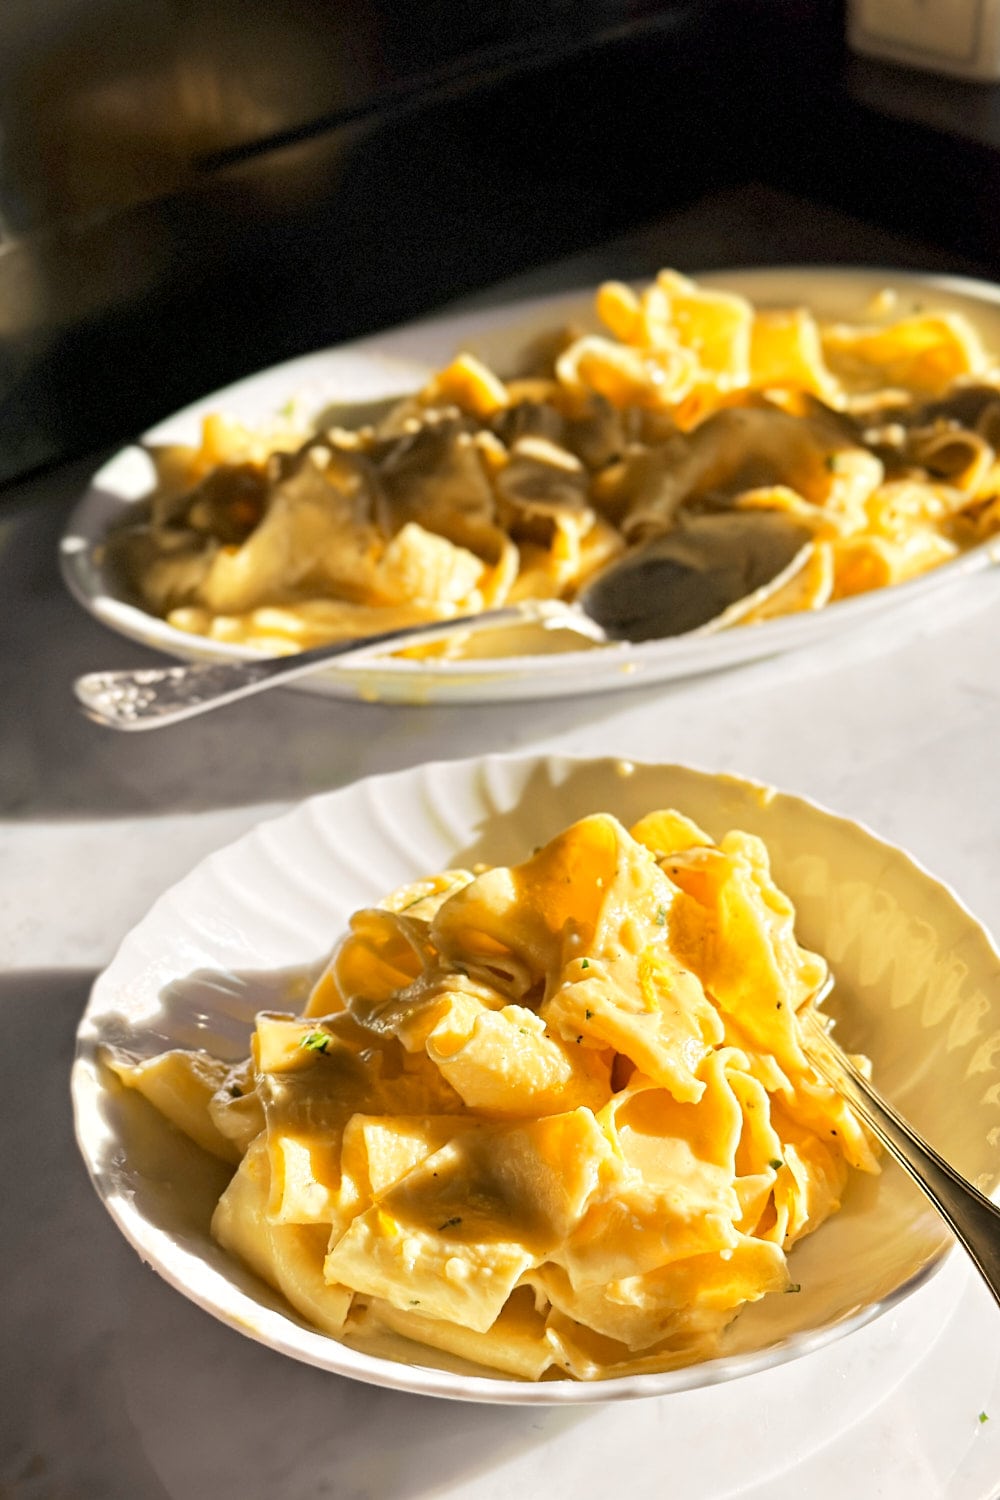 Fresh pappardelle with creamy lemon sauce on a white plate.